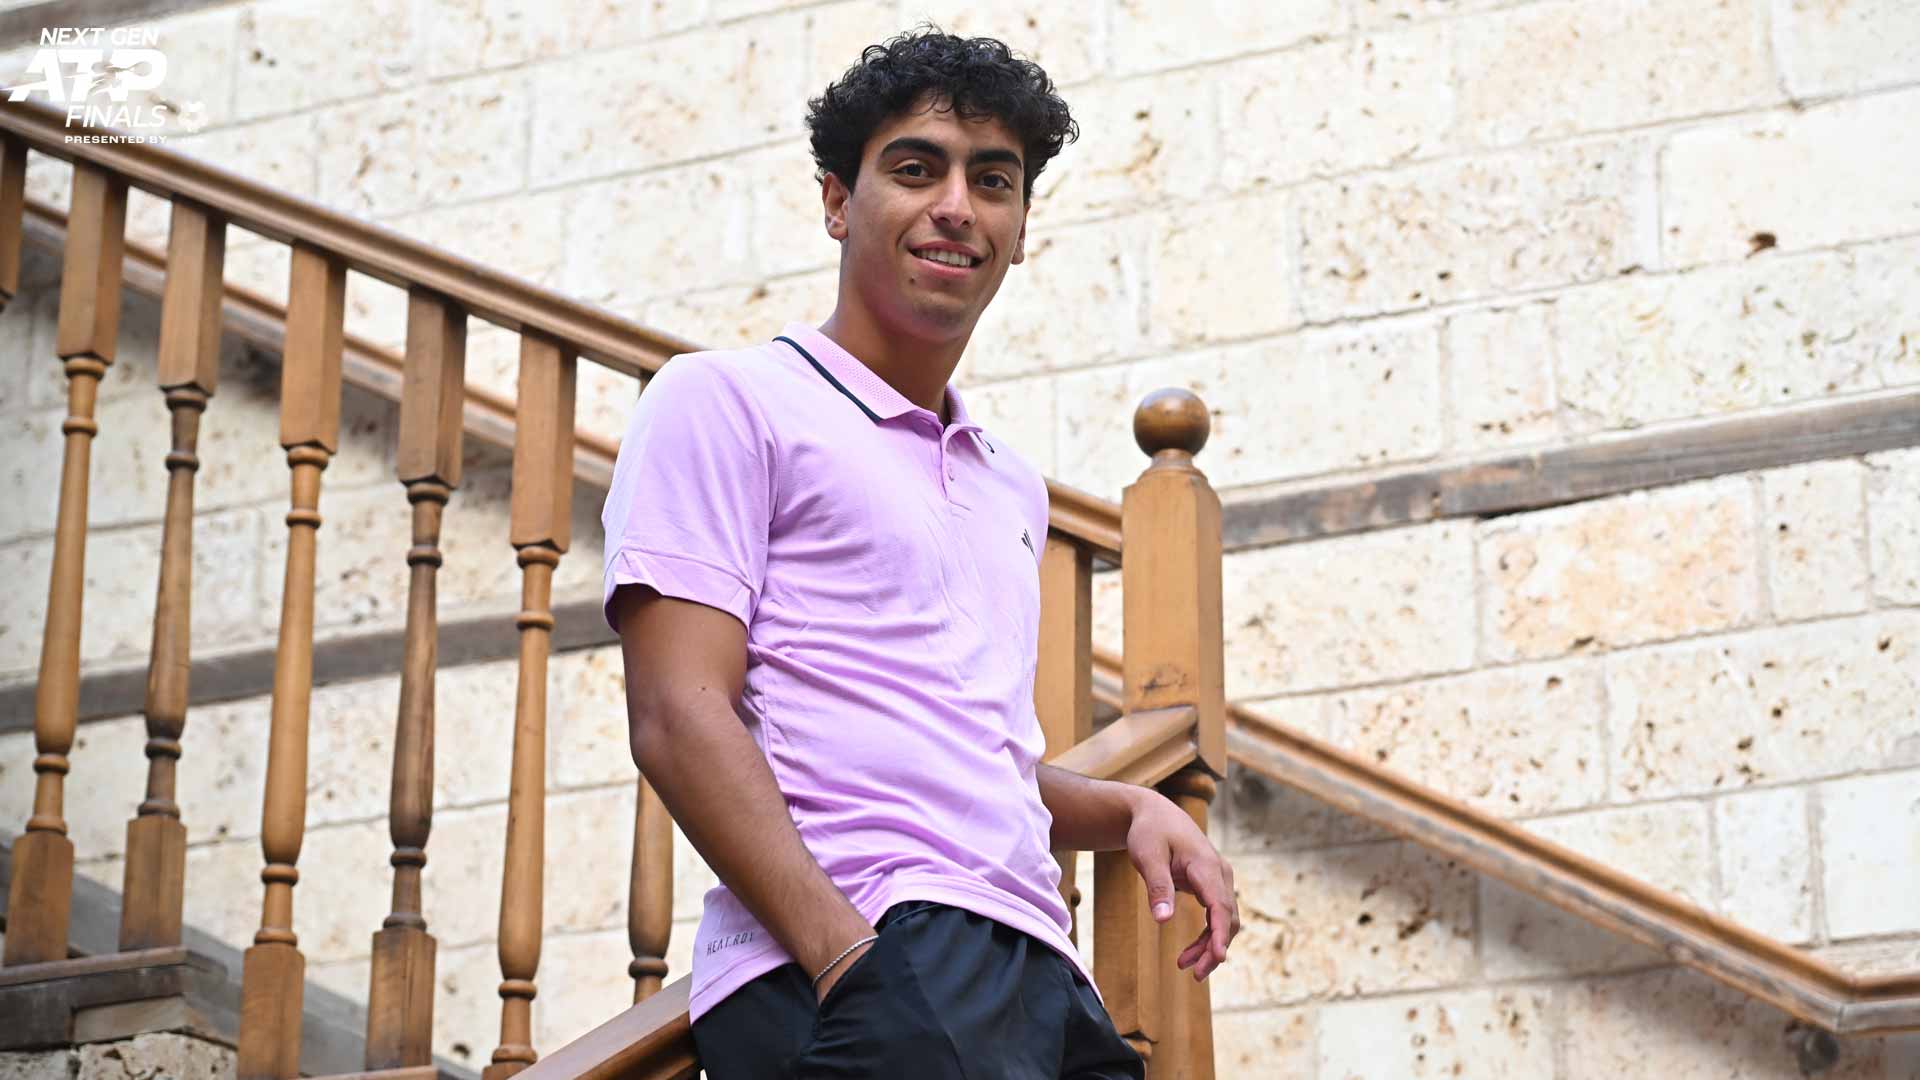 Abdullah Shelbayh is at a career-high World No. 185 in the Pepperstone ATP Rankings.